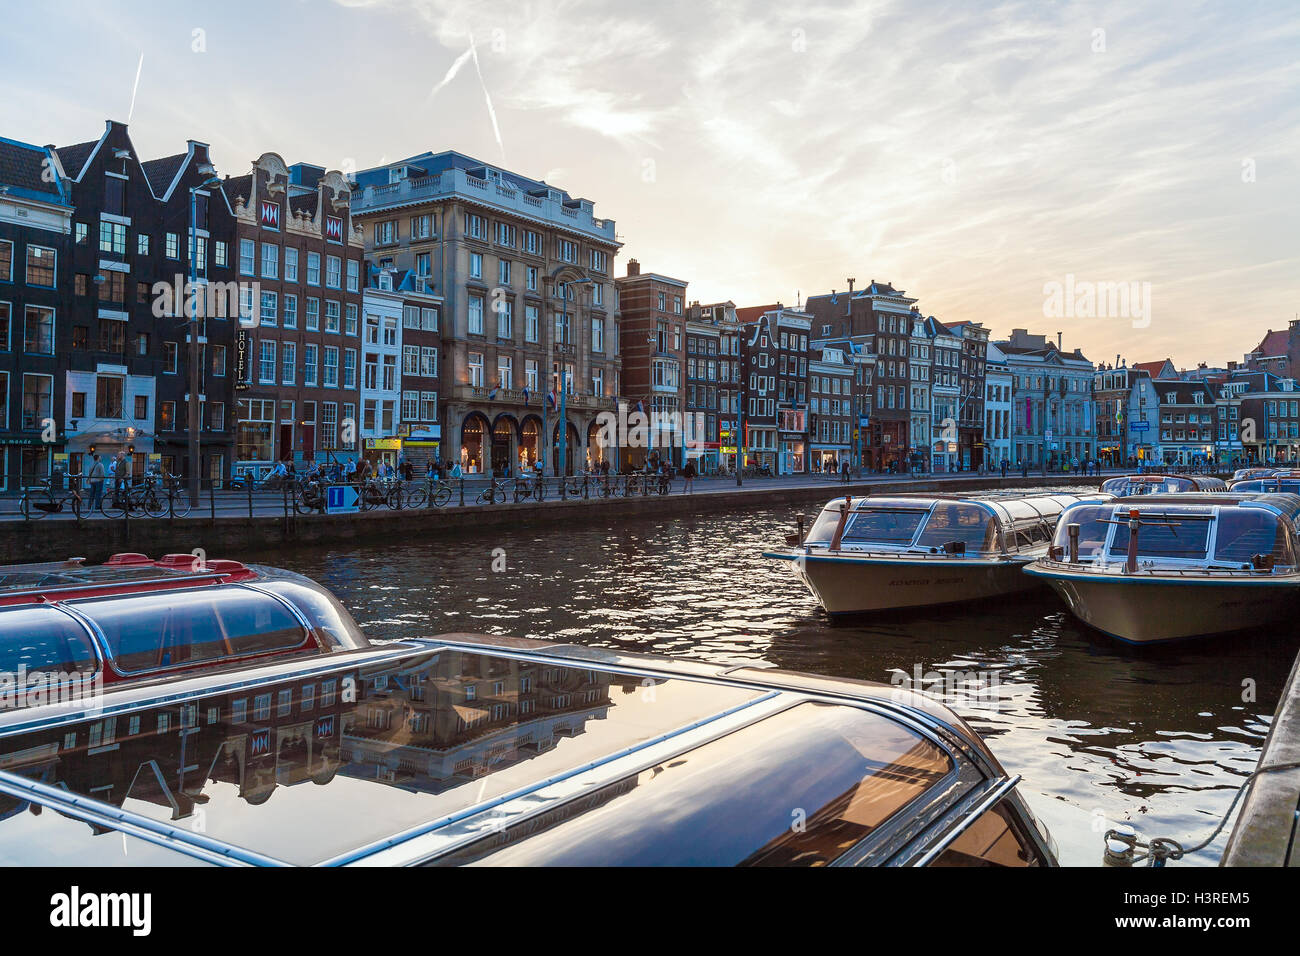 AMSTERDAM, NETHERLANDS - APRIL 3, 2008: The famous dancing old houses along the canal Rokin after sunset Stock Photo